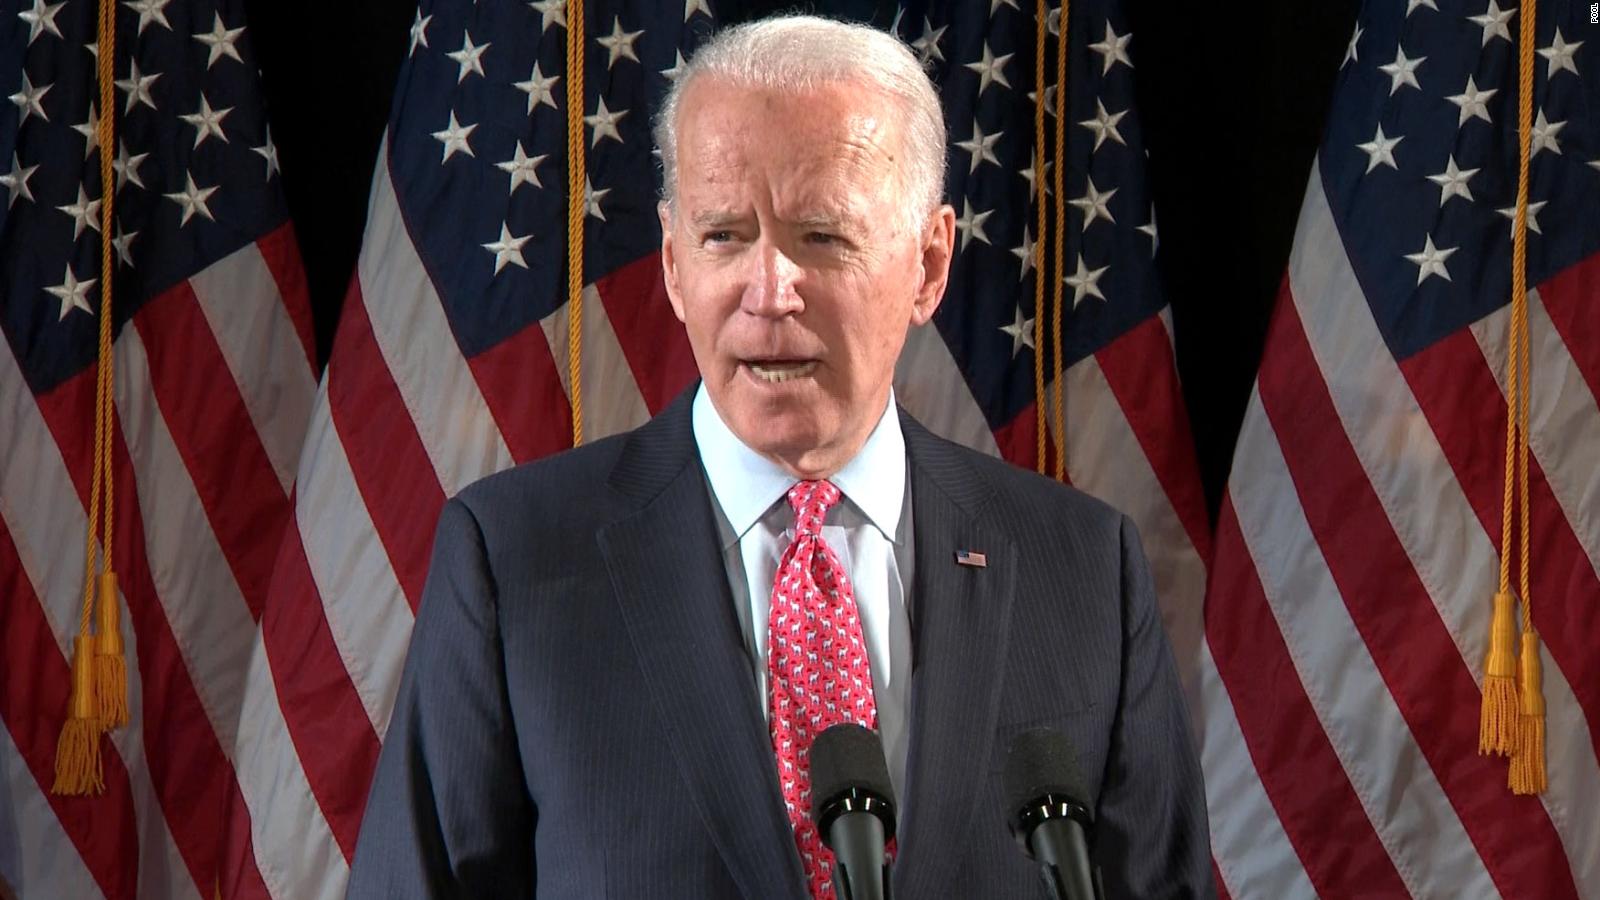 In speech, Biden shows how a normal president responds in crisis (opinion)